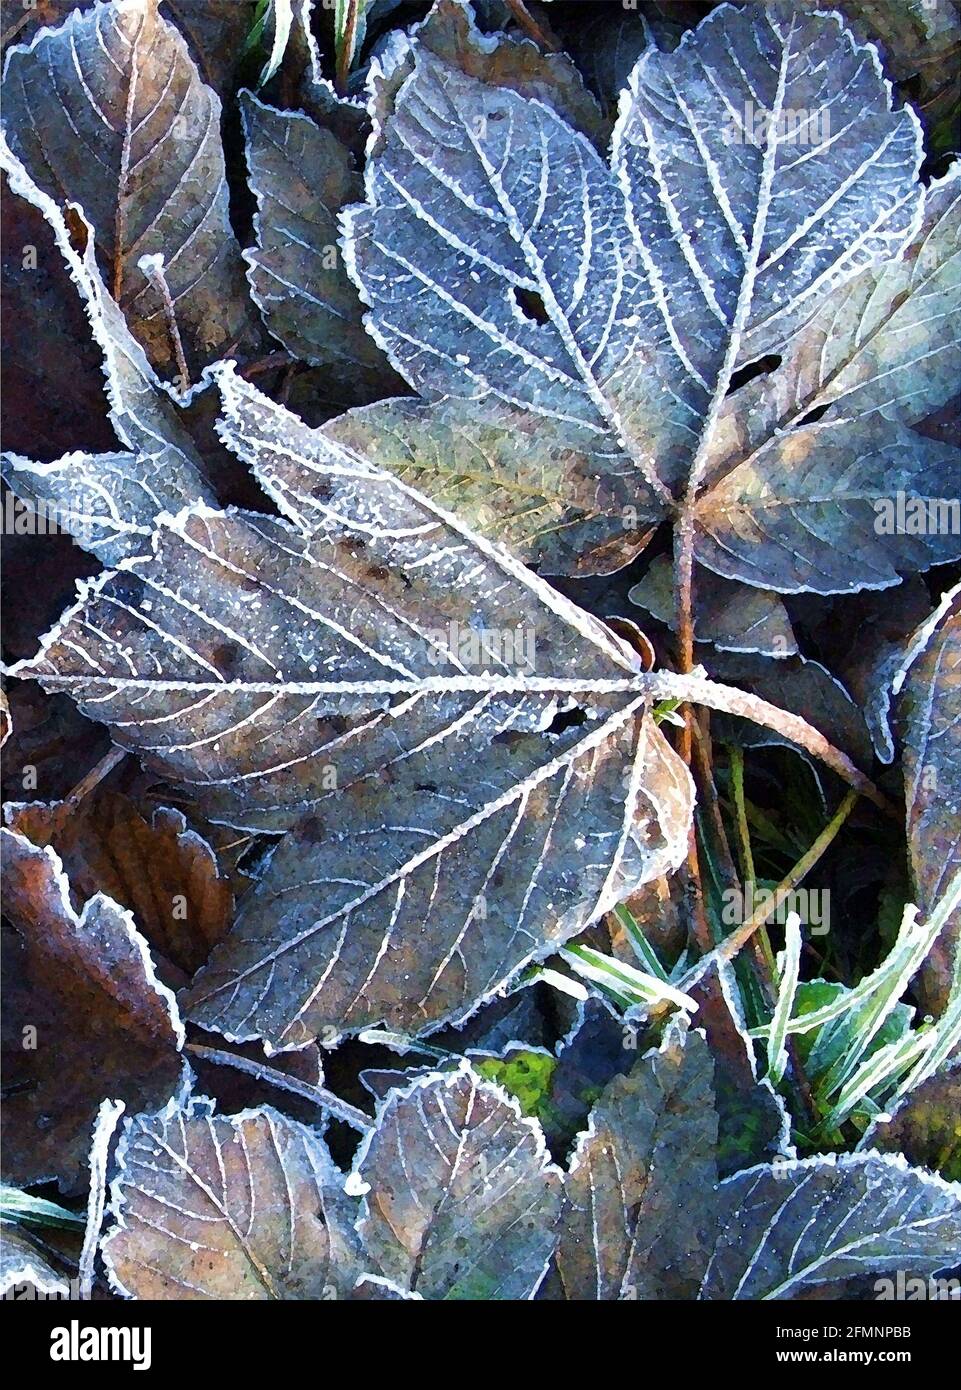 Frosted Sycamore Leaves (Acer pseudo-platanus) One of Forty-two Iconic Images of English Garden Flowers, Wildflowers and Rural Landscapes. Stock Photo